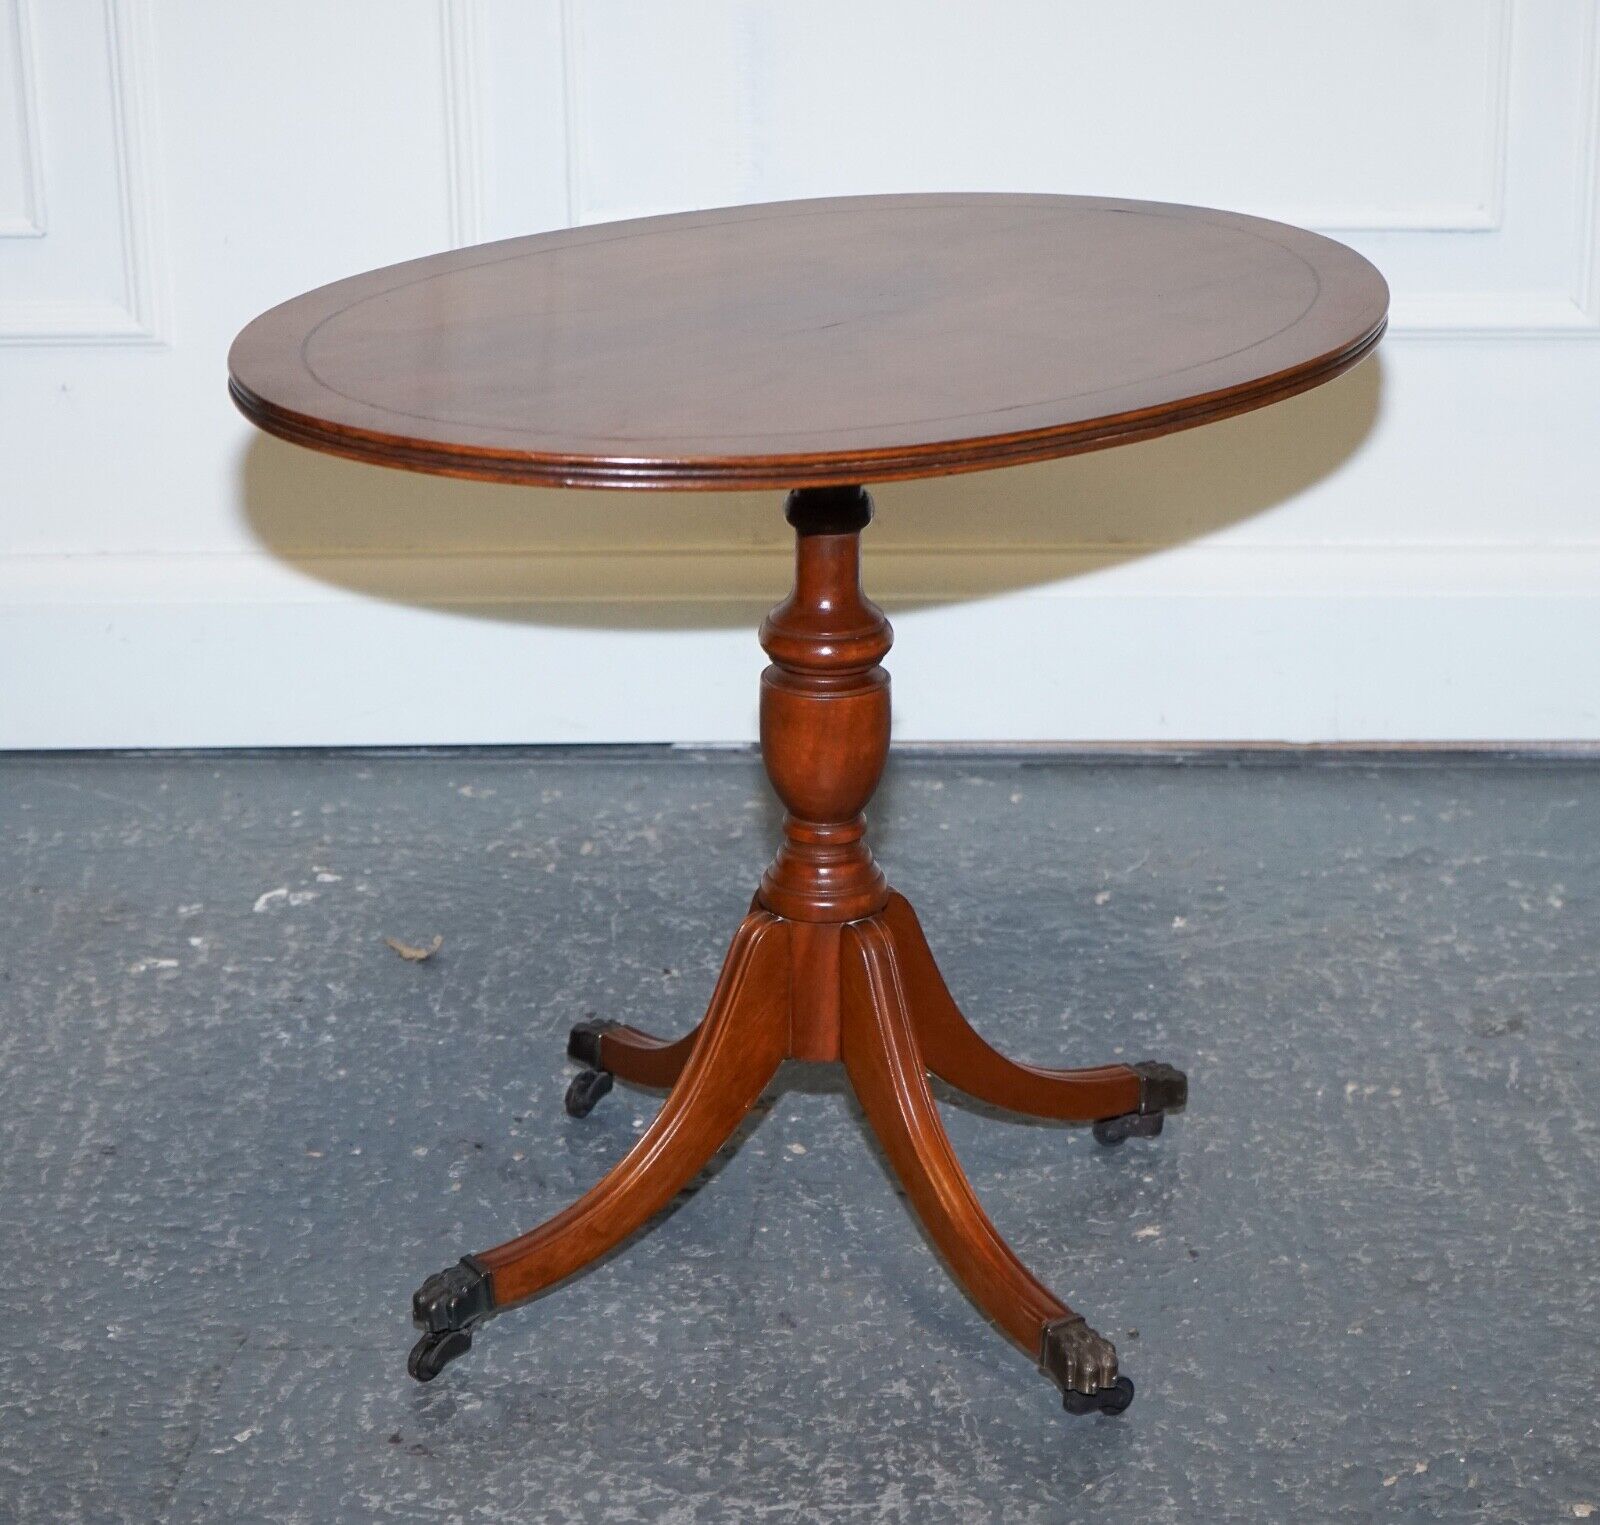 LOVELY VINTAGE OVAL BURR YEW WOOD SIDE TABLE ON TRIPOD LEGS